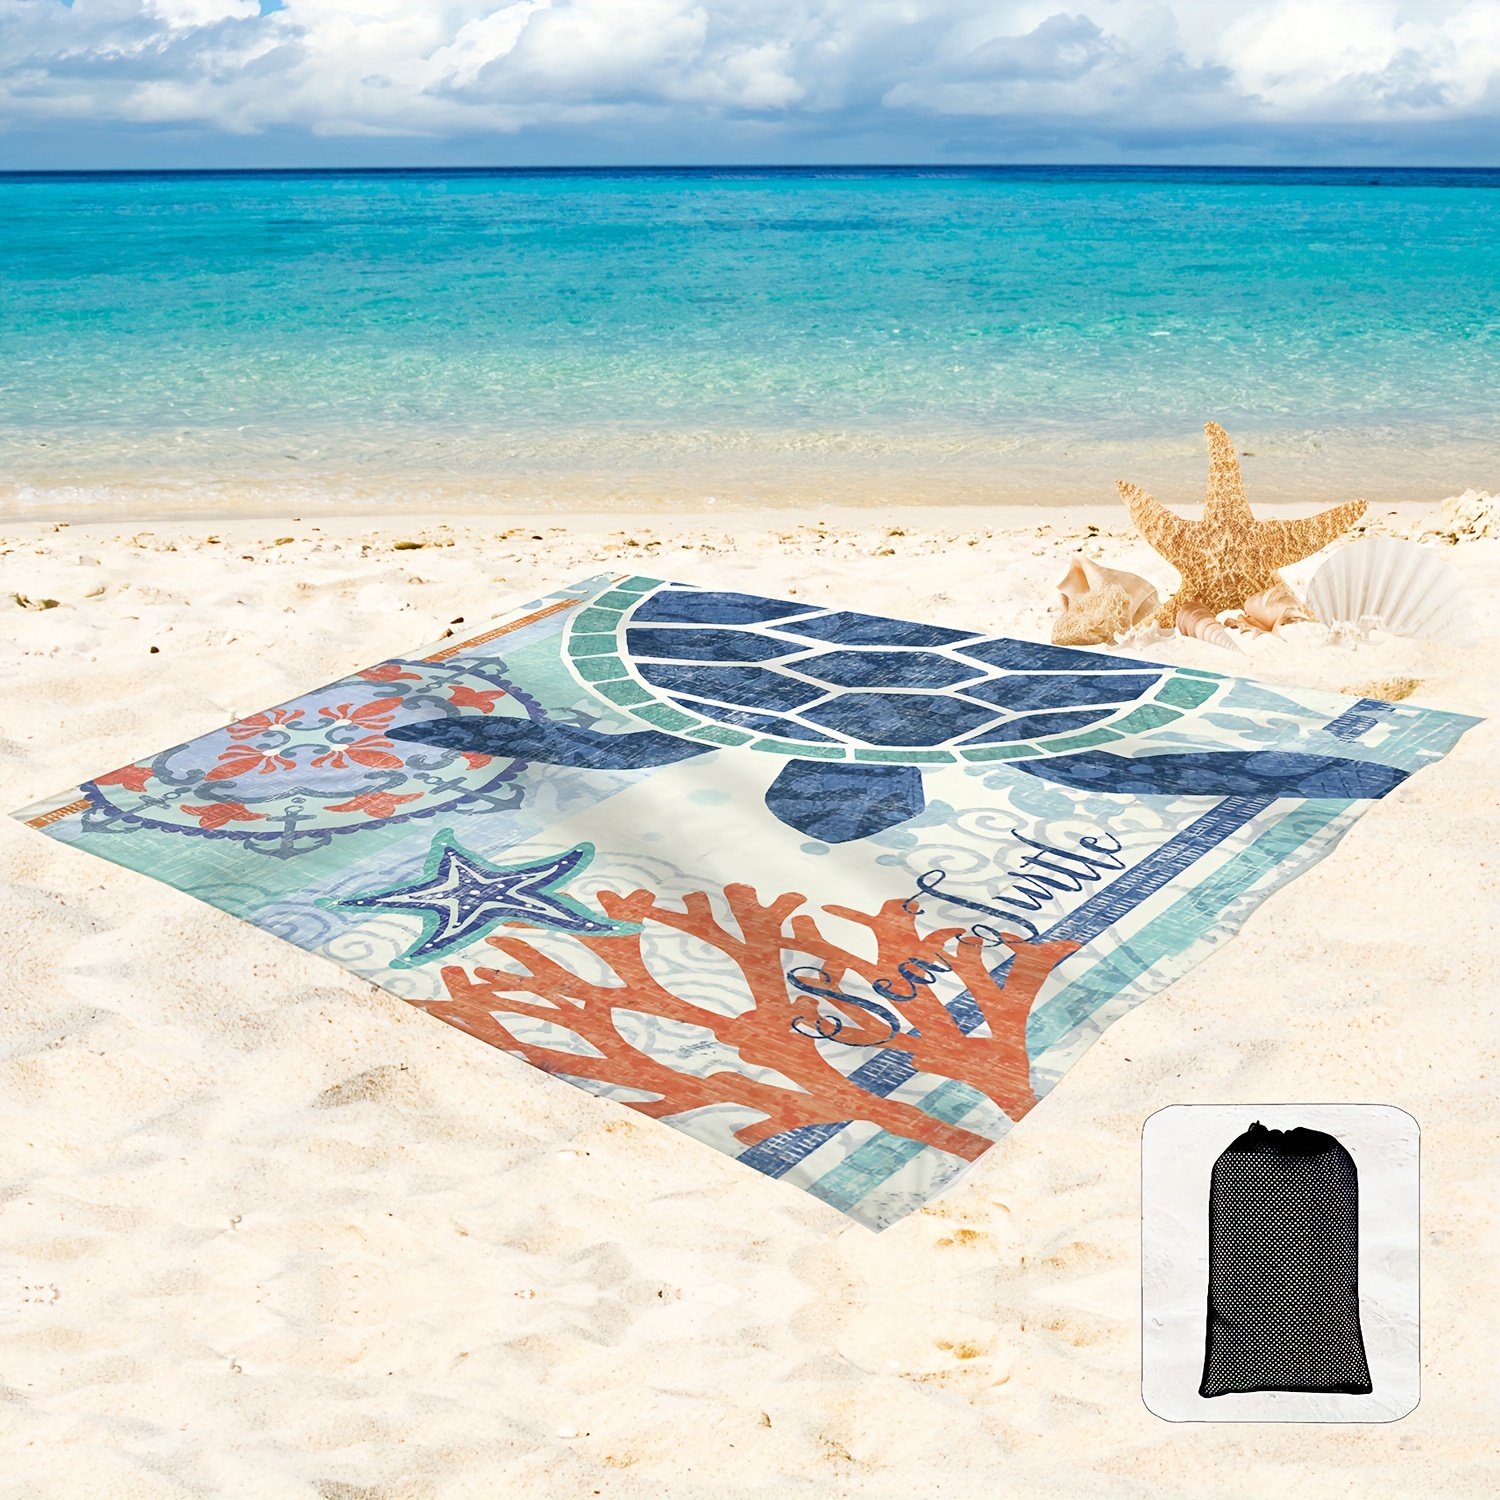 

1pc Sea Turtle Sand Blanket, Picnic Blanket, Waterproof Foldable, 81 "x 96" Outdoor Travel Beach Large Beach Mat, Portable Picnic Mat, Sand Mat, Suitable For Travel Camping Hiking Picnics